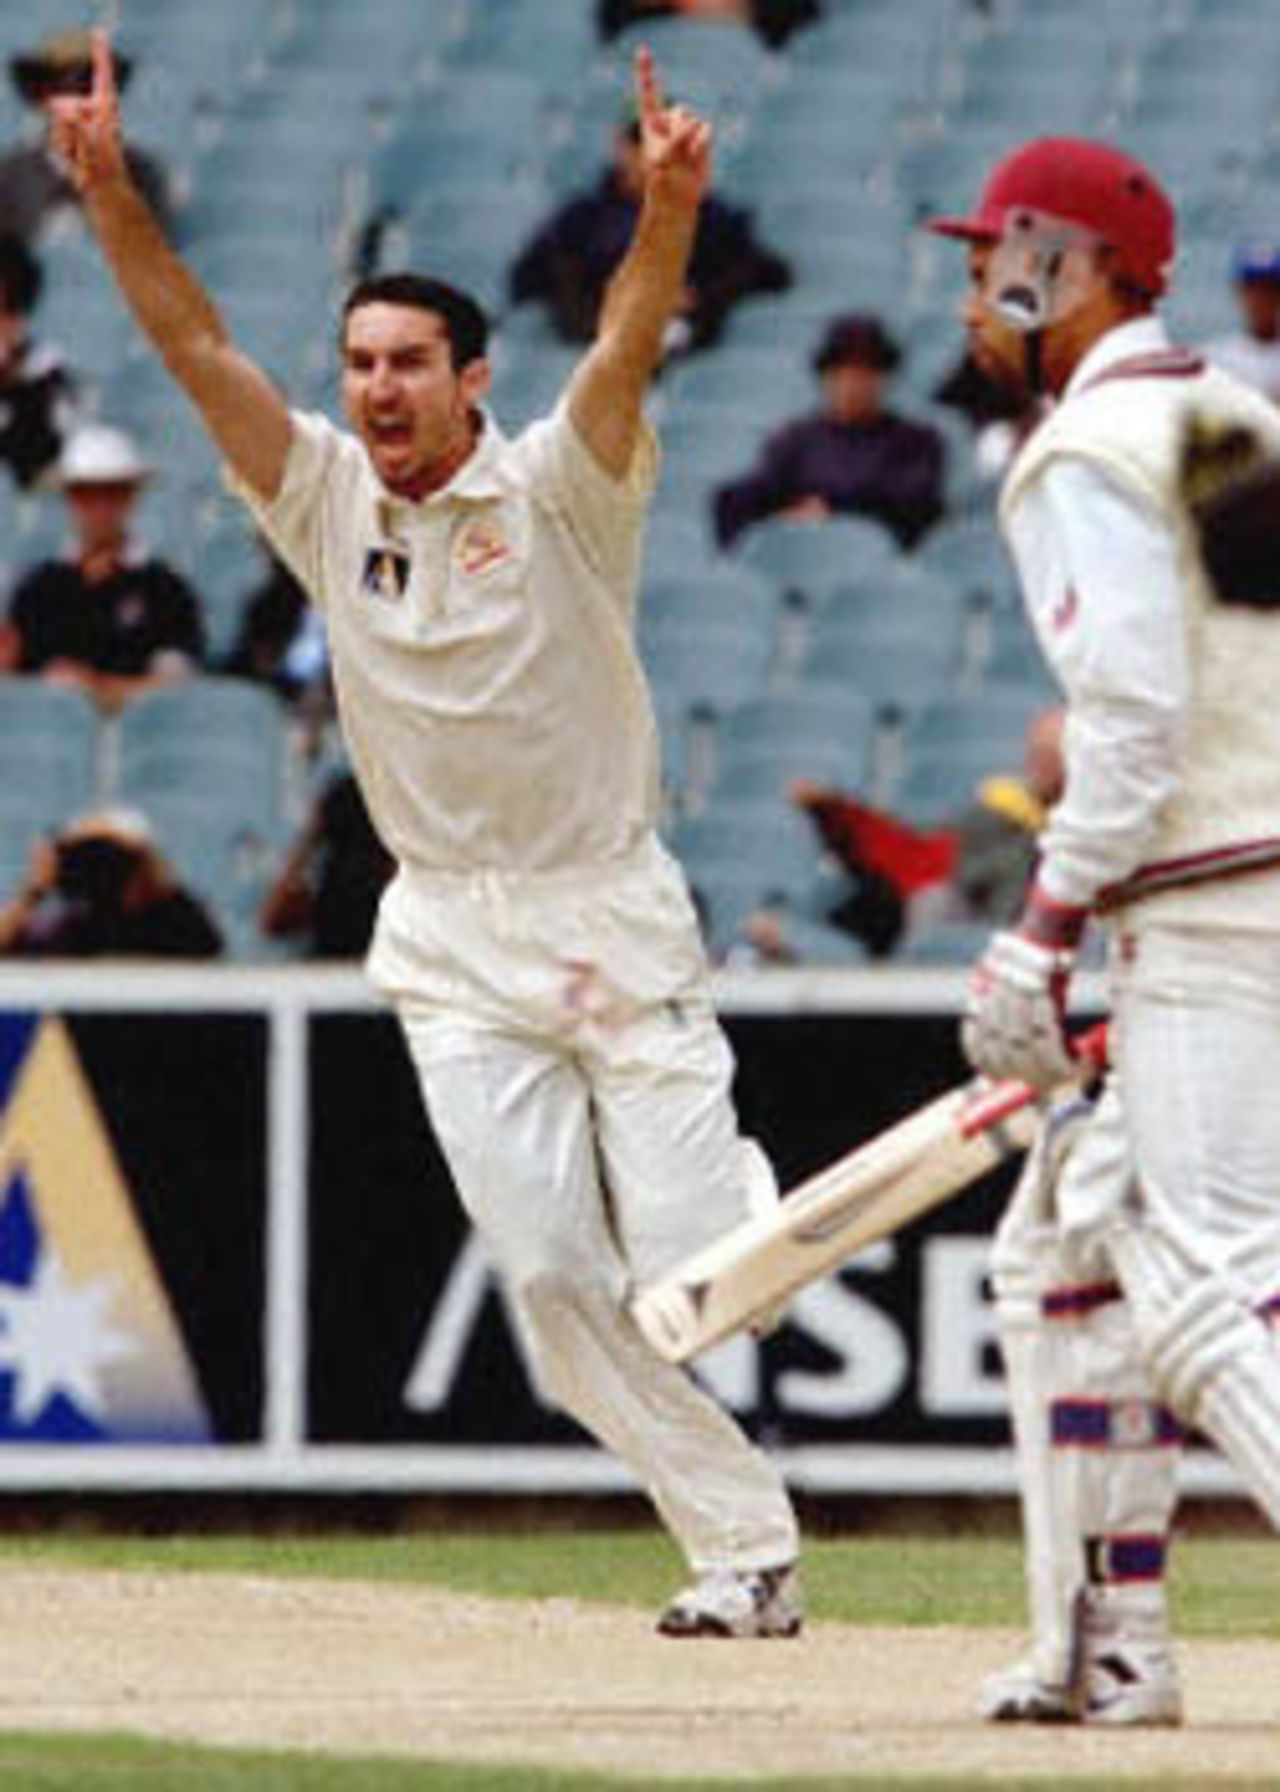 Australian paceman Jason Gillespie (L) celebrates taking the wicket of West Indian captain Jimmy Adams (R) for a golden duck as Gillespie has the figures of 6-24 on the fourth day of the fourth Test match at the MCG in Melbourne, 29 December 2000. Once again the West Indies are on the verge of defeat being 78-8 at lunch, still requiring 384 runs for victory.